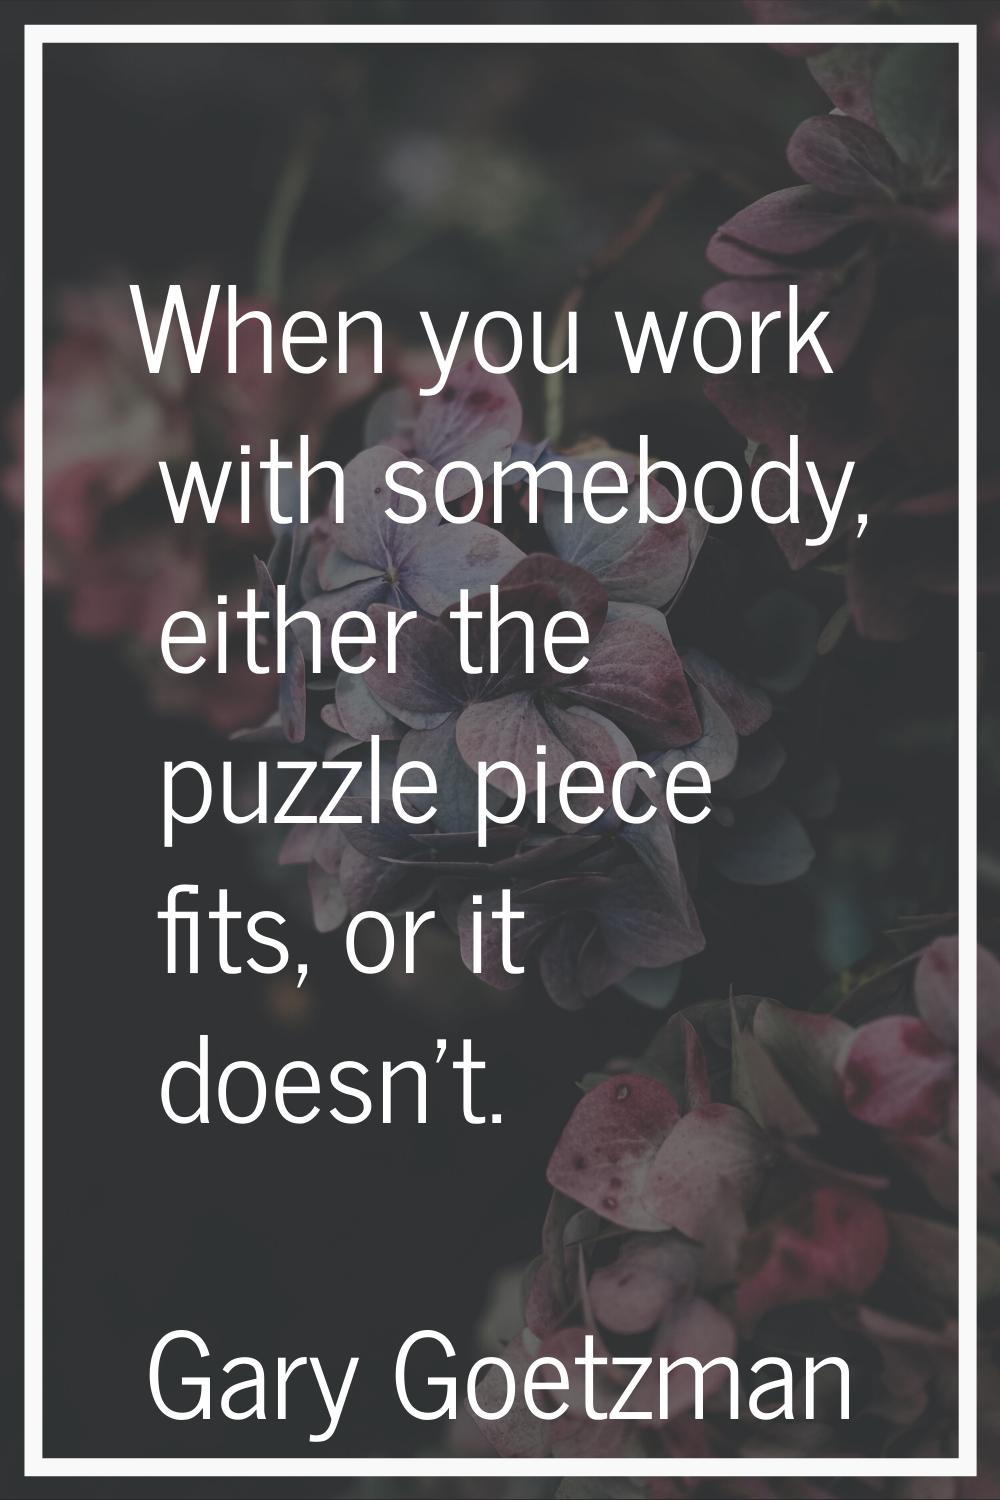 When you work with somebody, either the puzzle piece fits, or it doesn't.